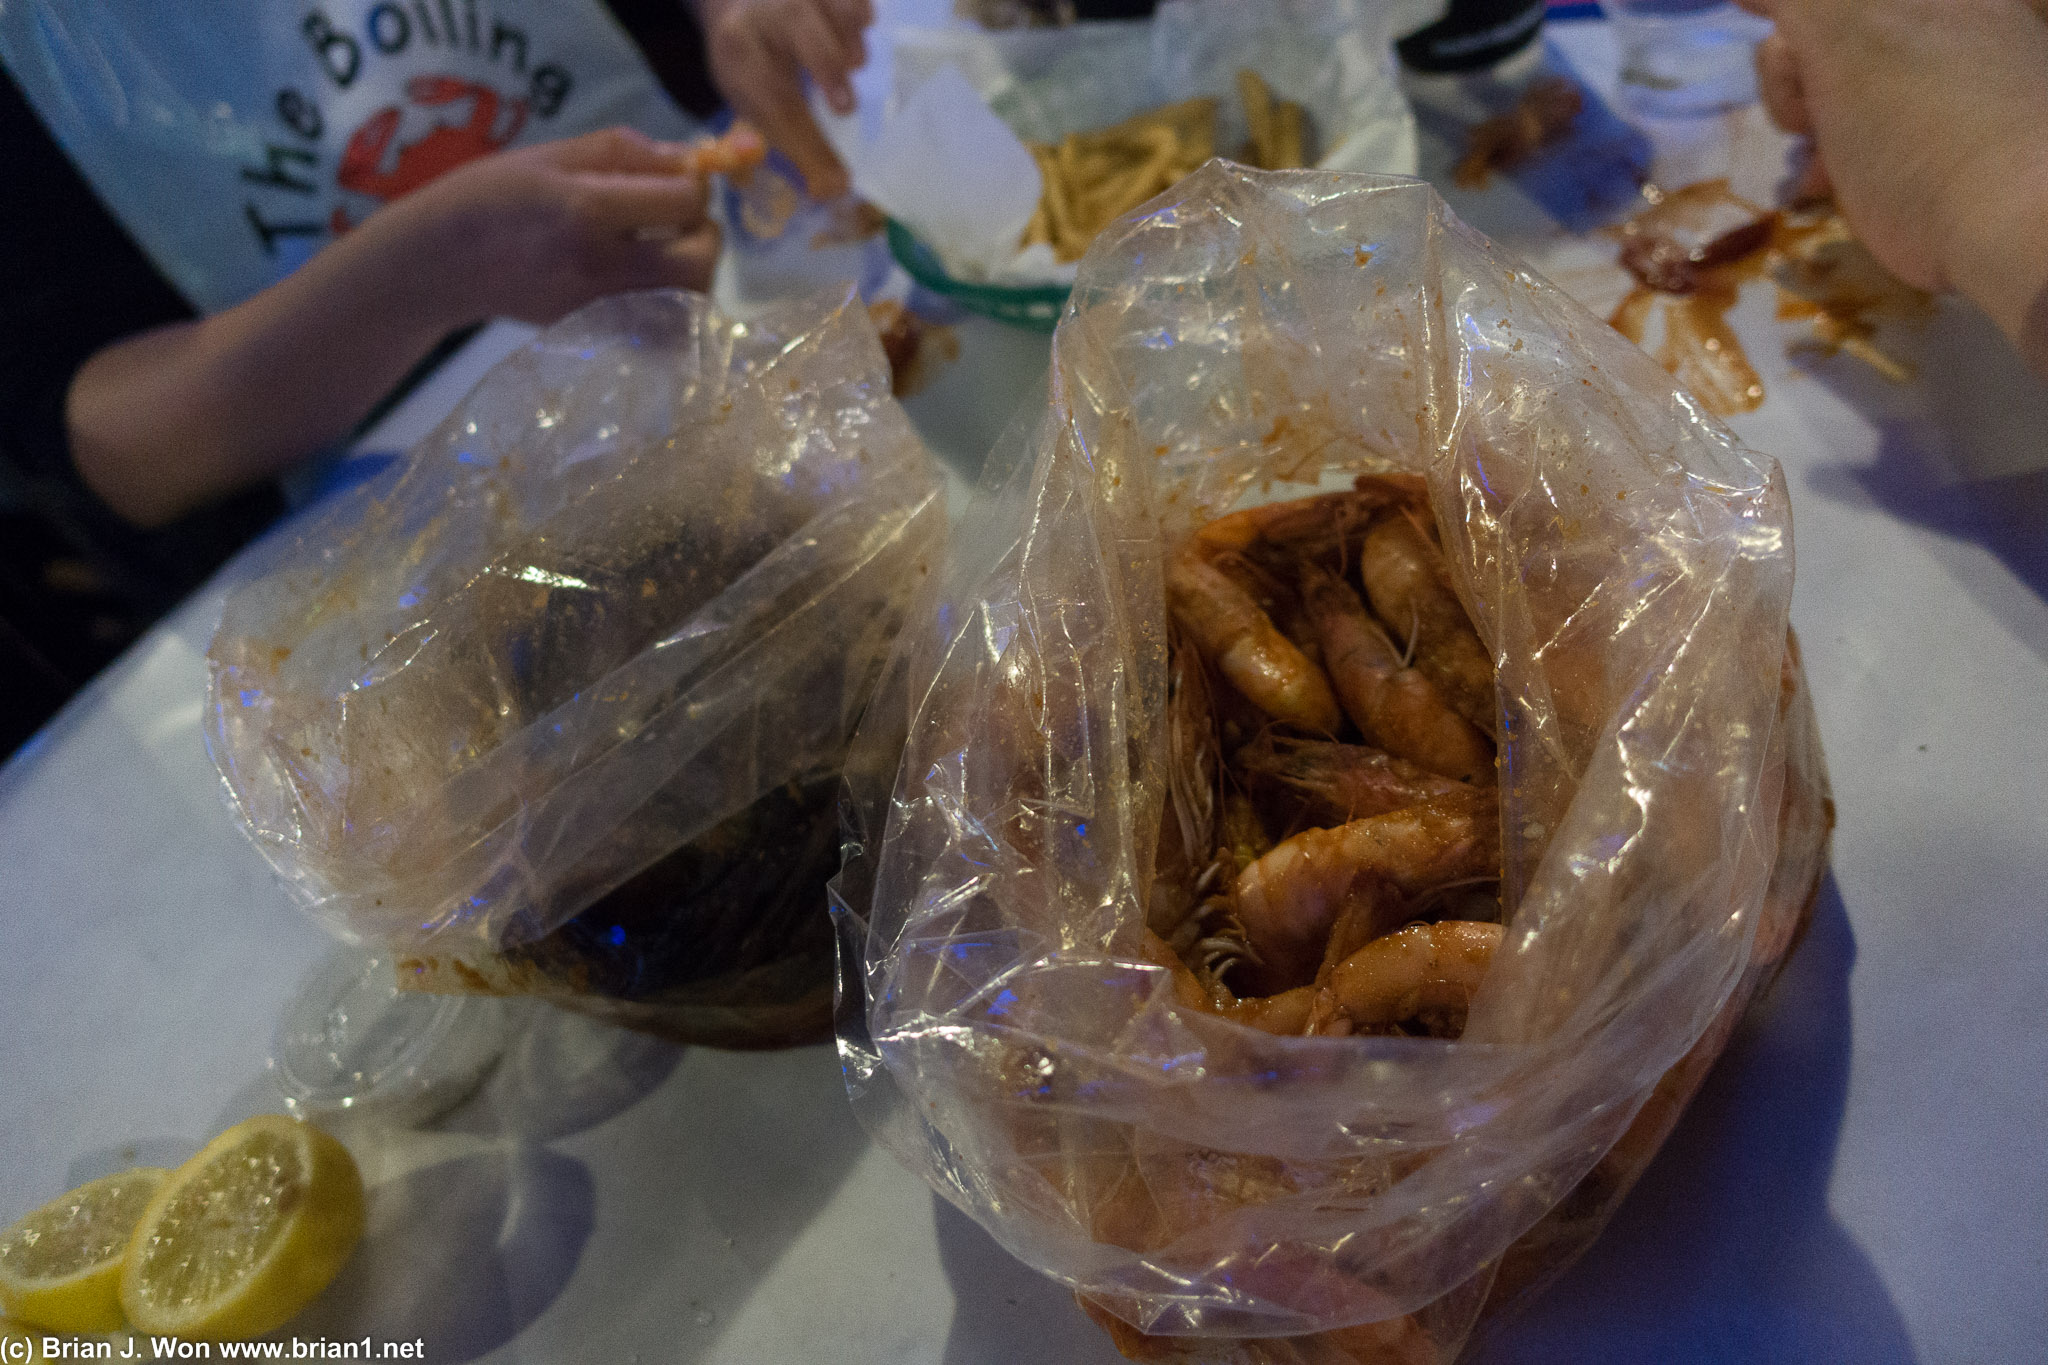 Shrimp and mussels at Boiling Crab.